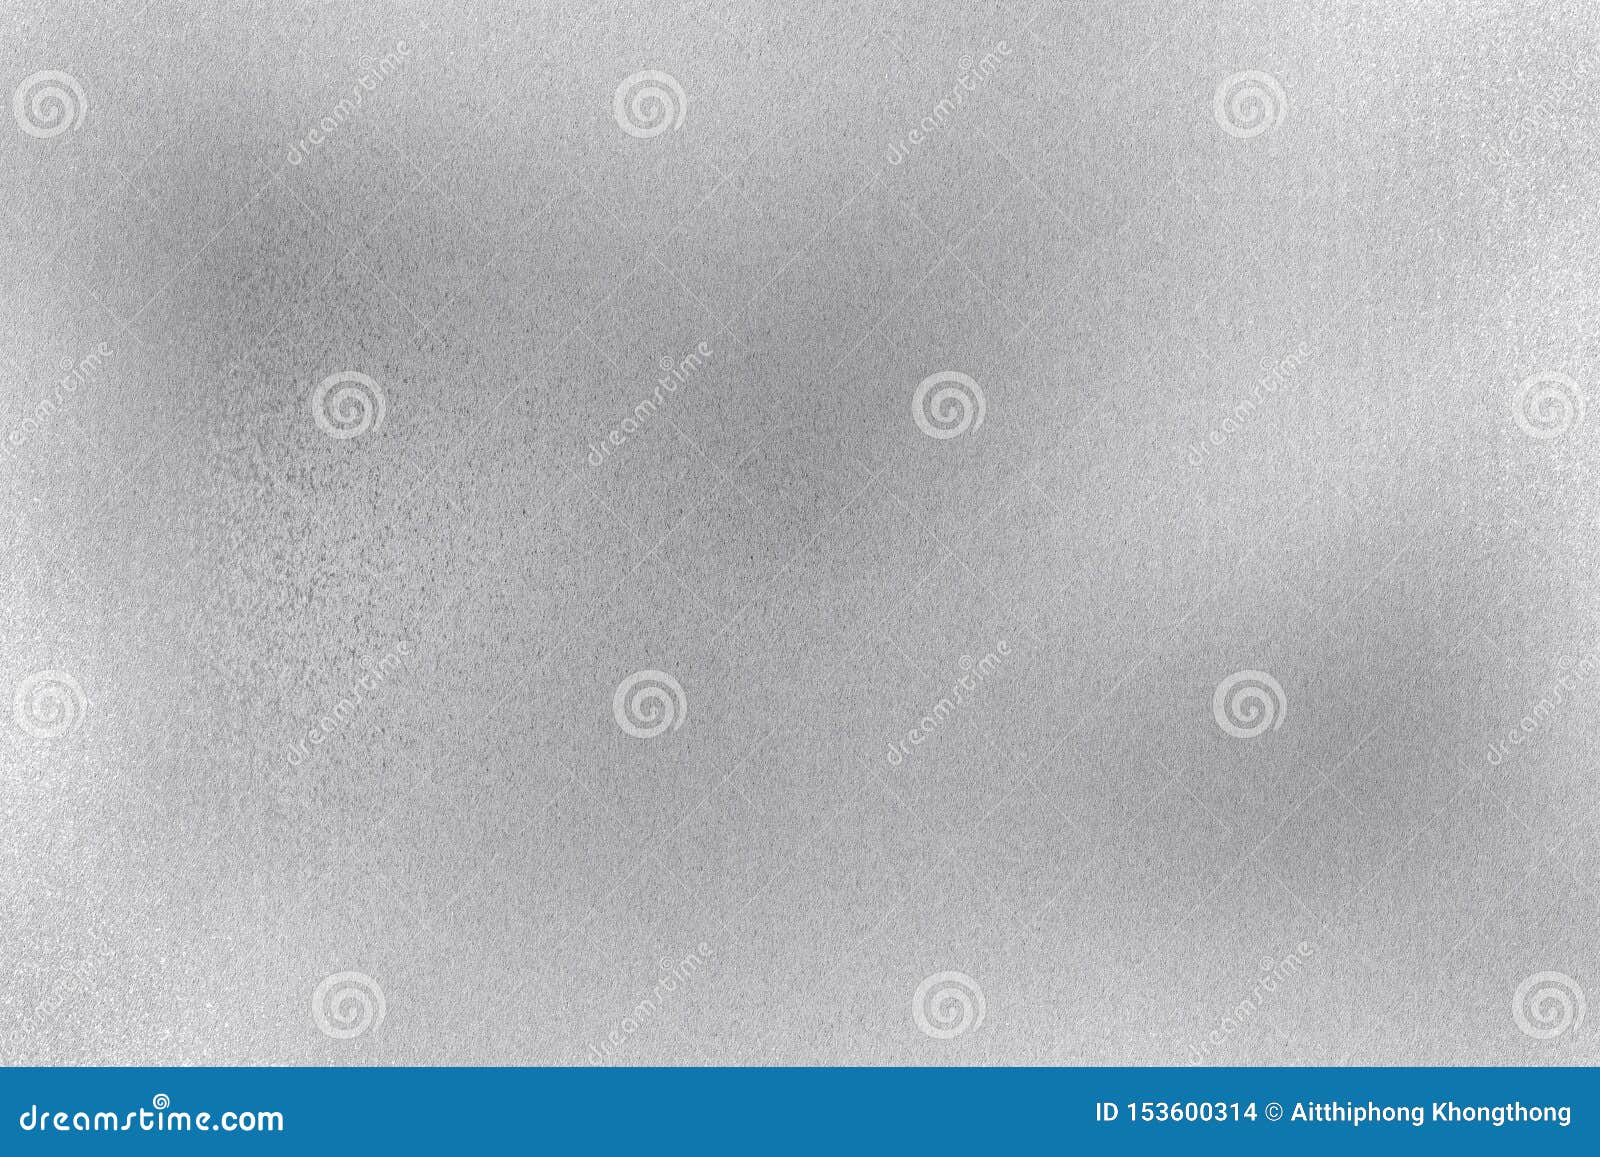 Dirty Old Silver Rough Metal Wall, Abstract Texture Background Stock ...